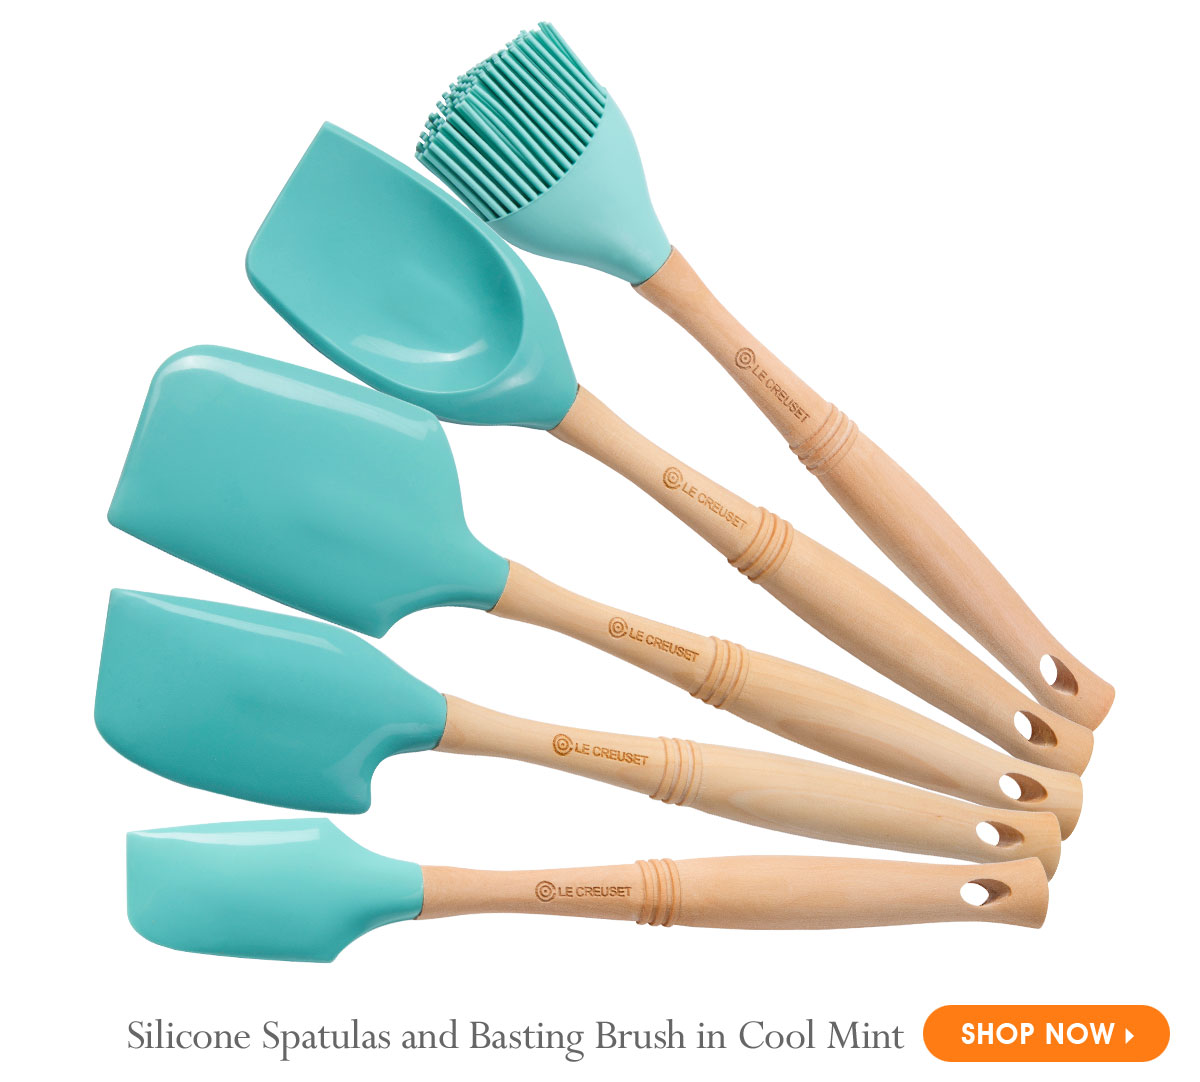 Silicone accessories in Cool Mint